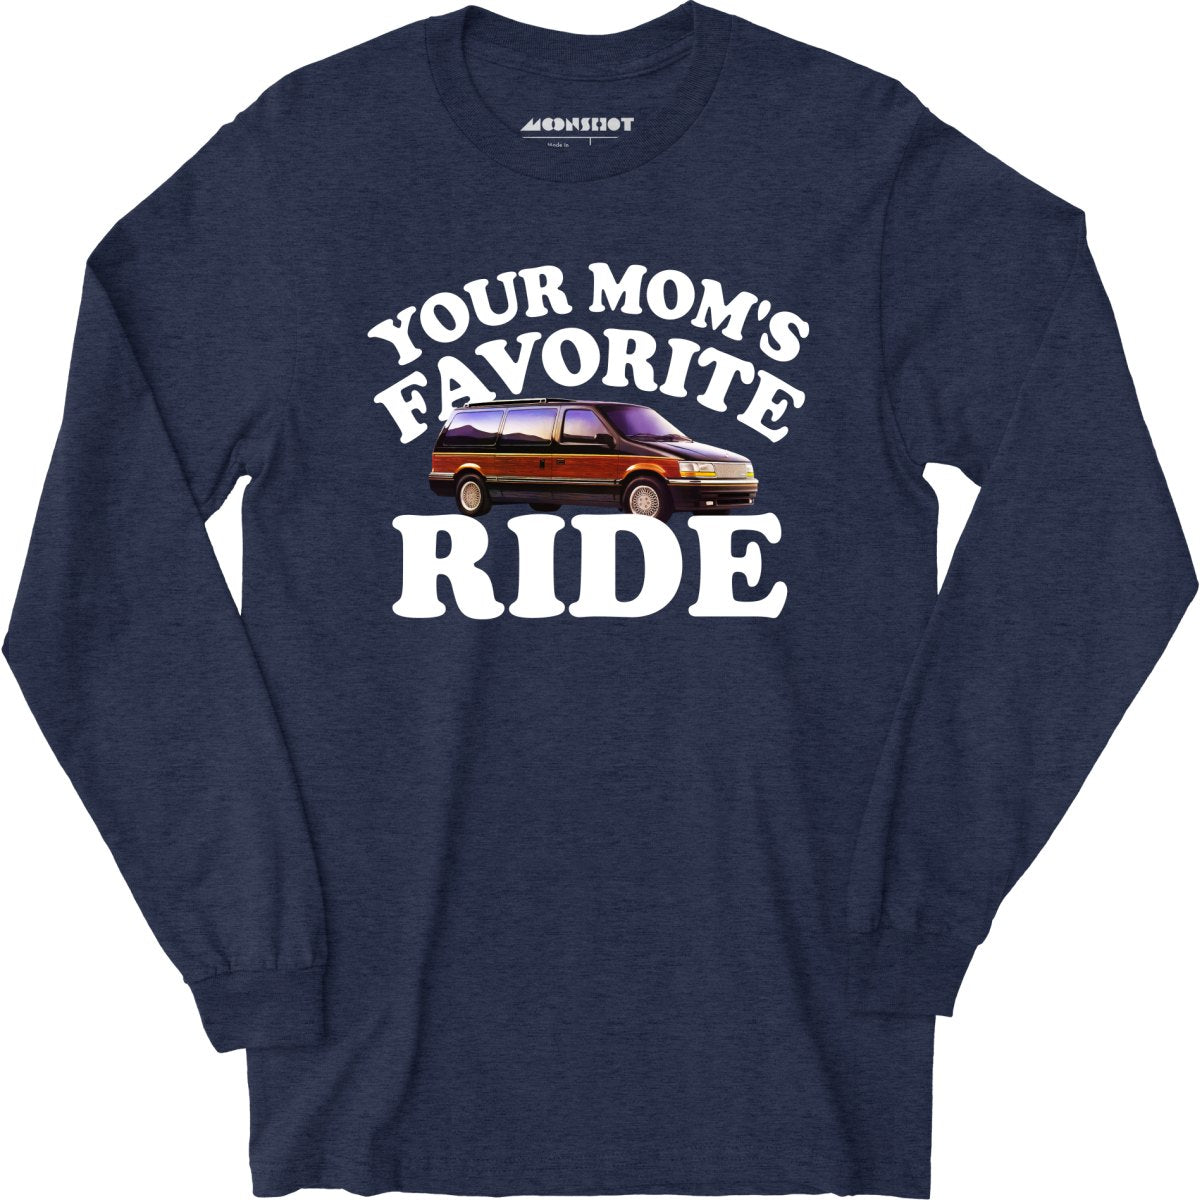 Your Mom's Favorite Ride - Long Sleeve T-Shirt